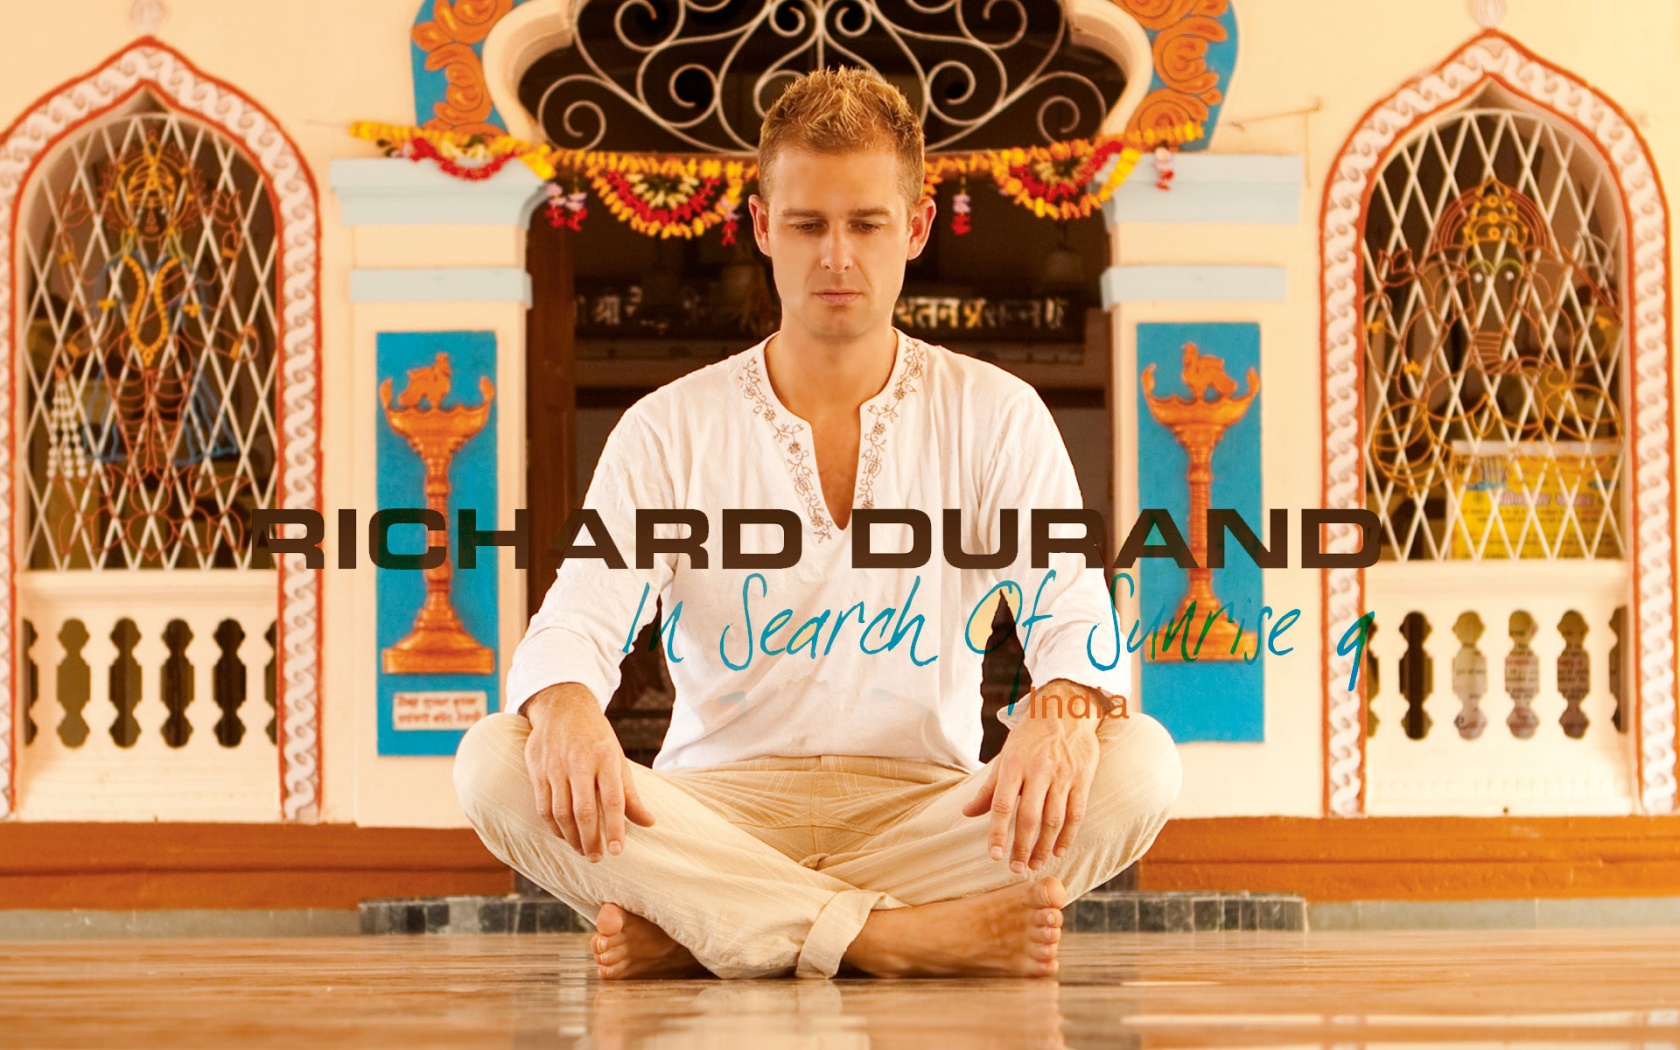 Richard Durand ISOS 9 India HD and Wide Wallpapers